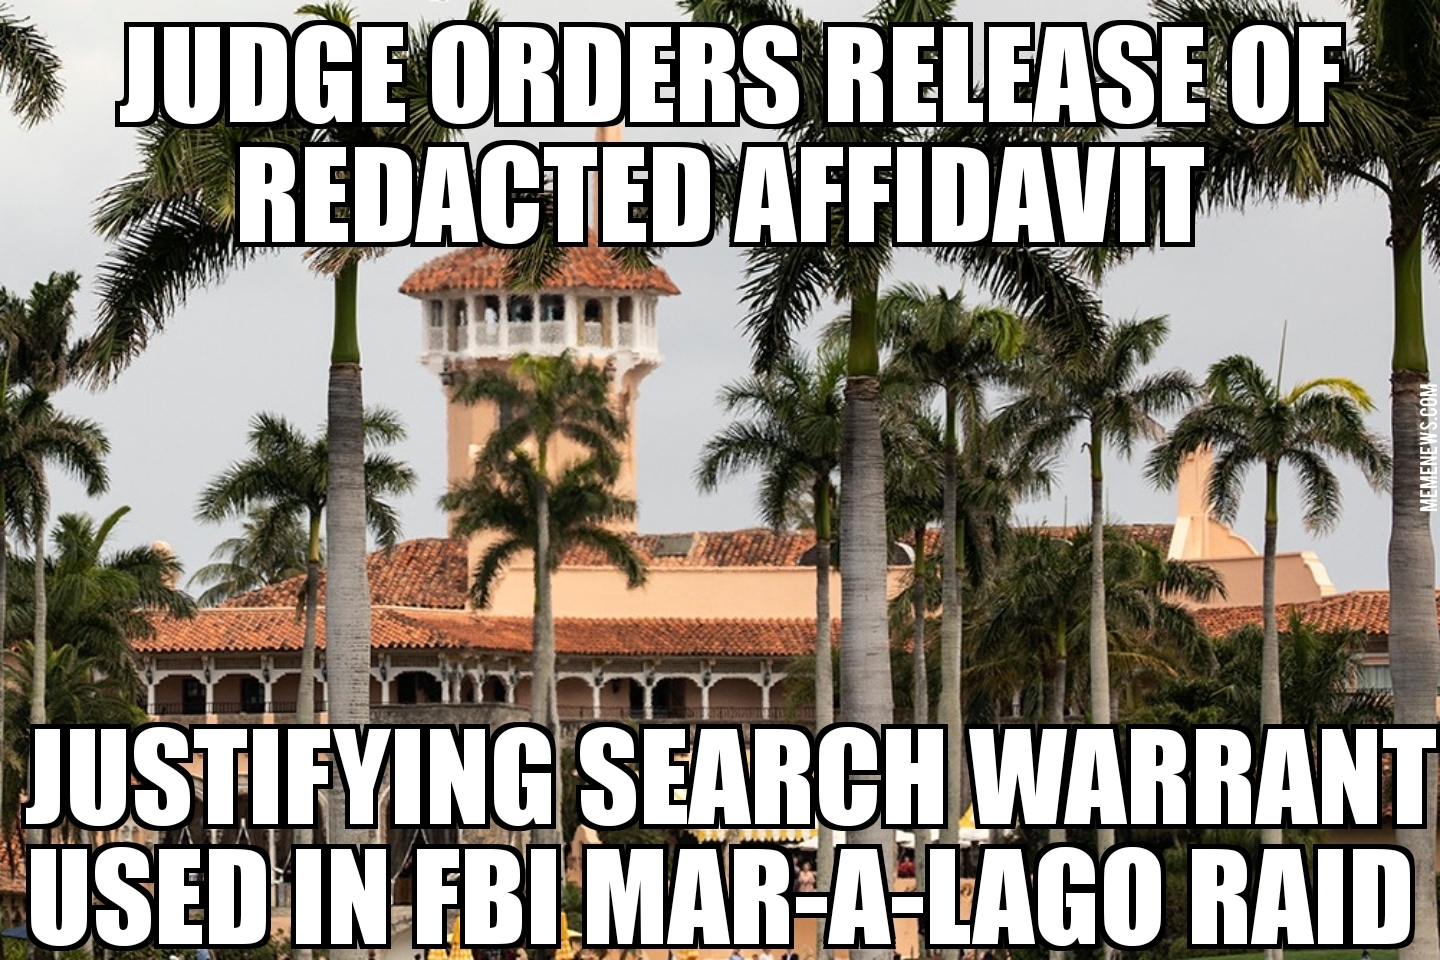 Mar-a-Lago search affidavit to be released